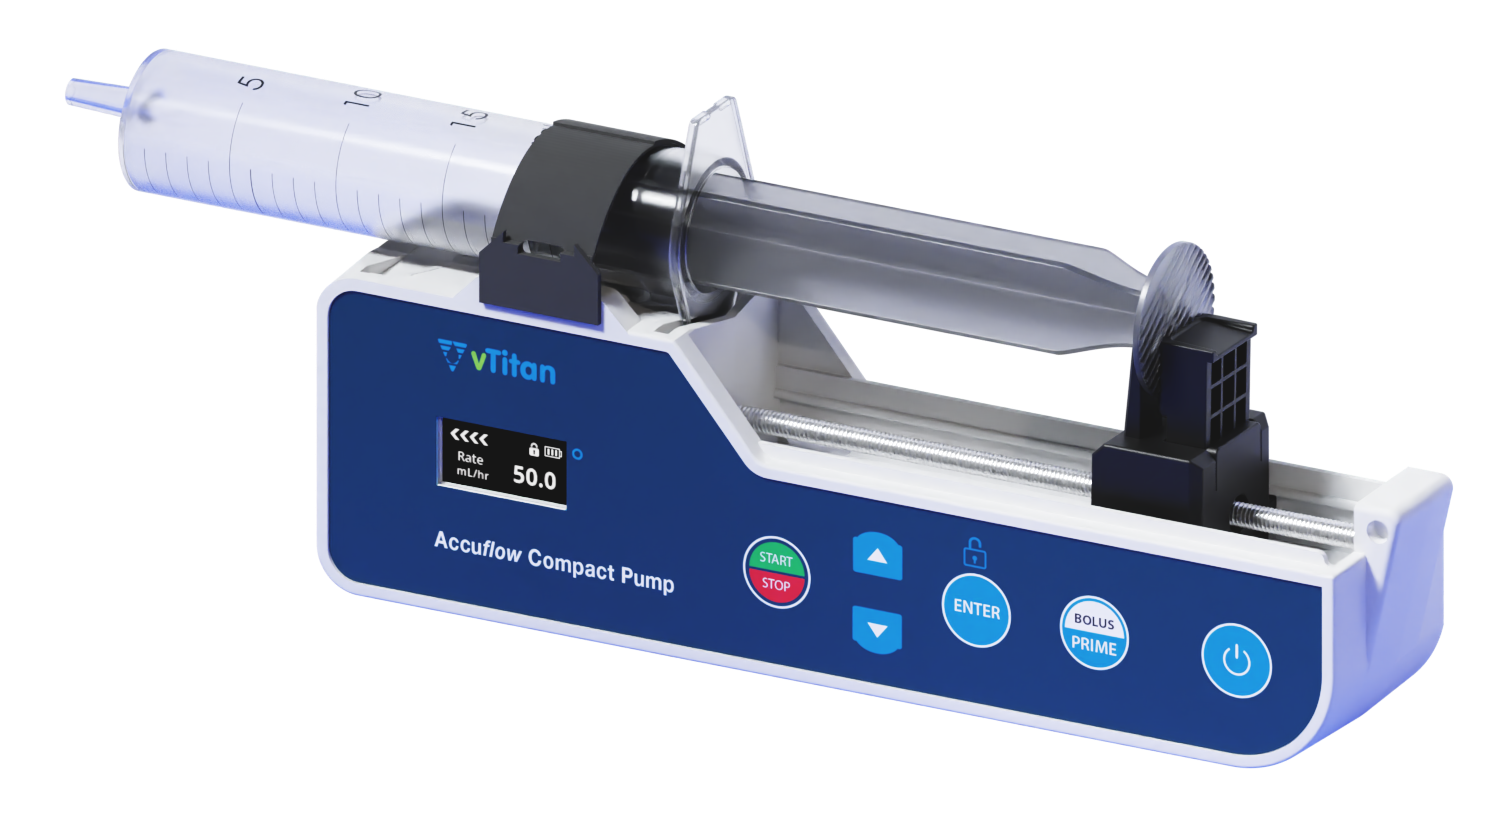 vTitan product Accuflow Compact Syringe Pump for IVIG and pain management therapy